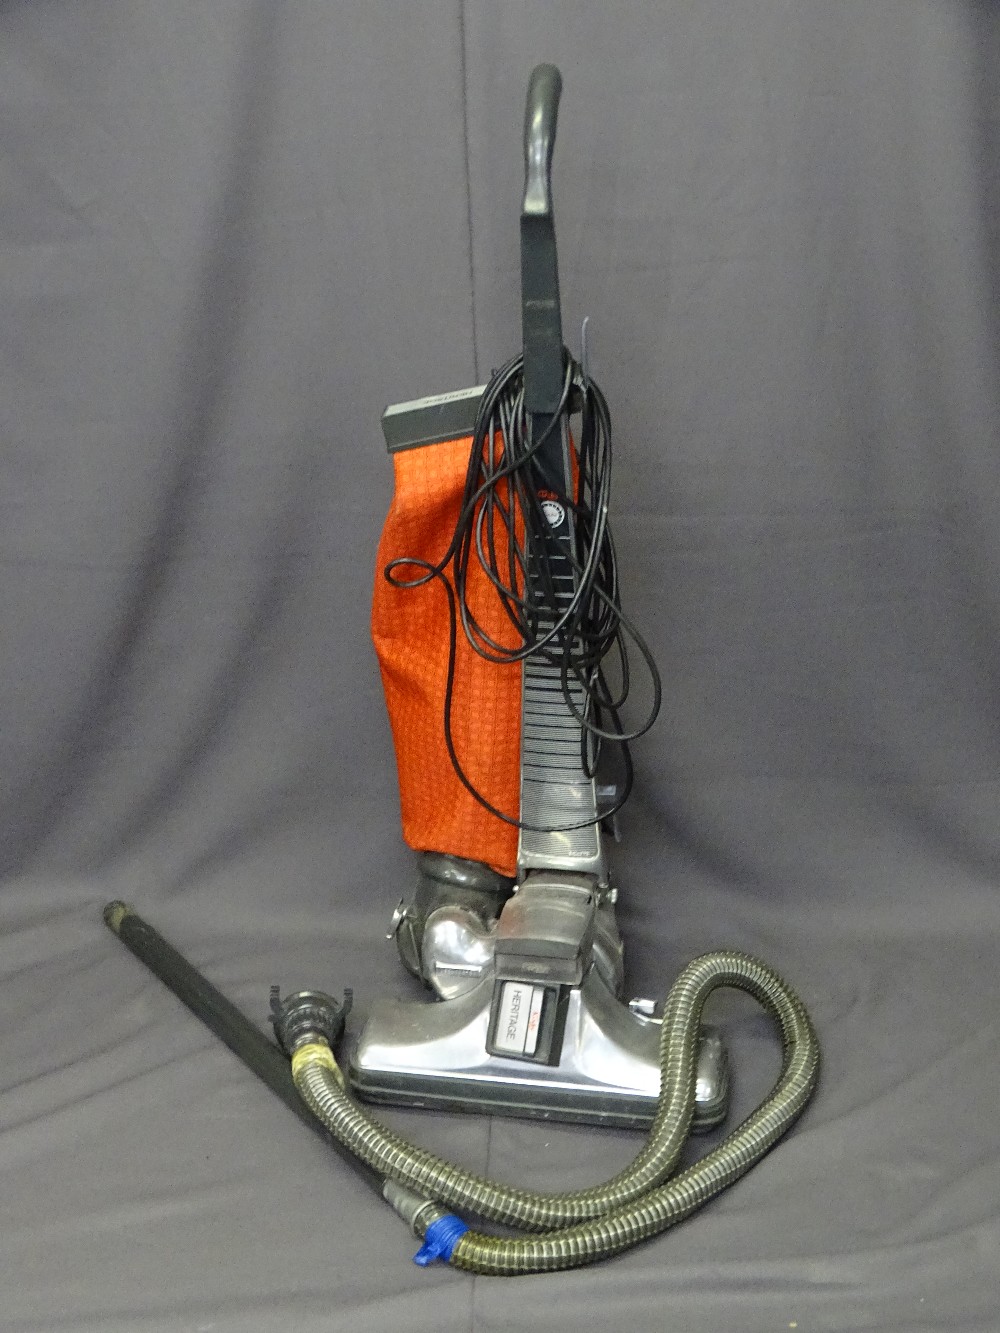 KIRBY HERITAGE UPRIGHT VACUUM CLEANER with attachments and accessories E/T